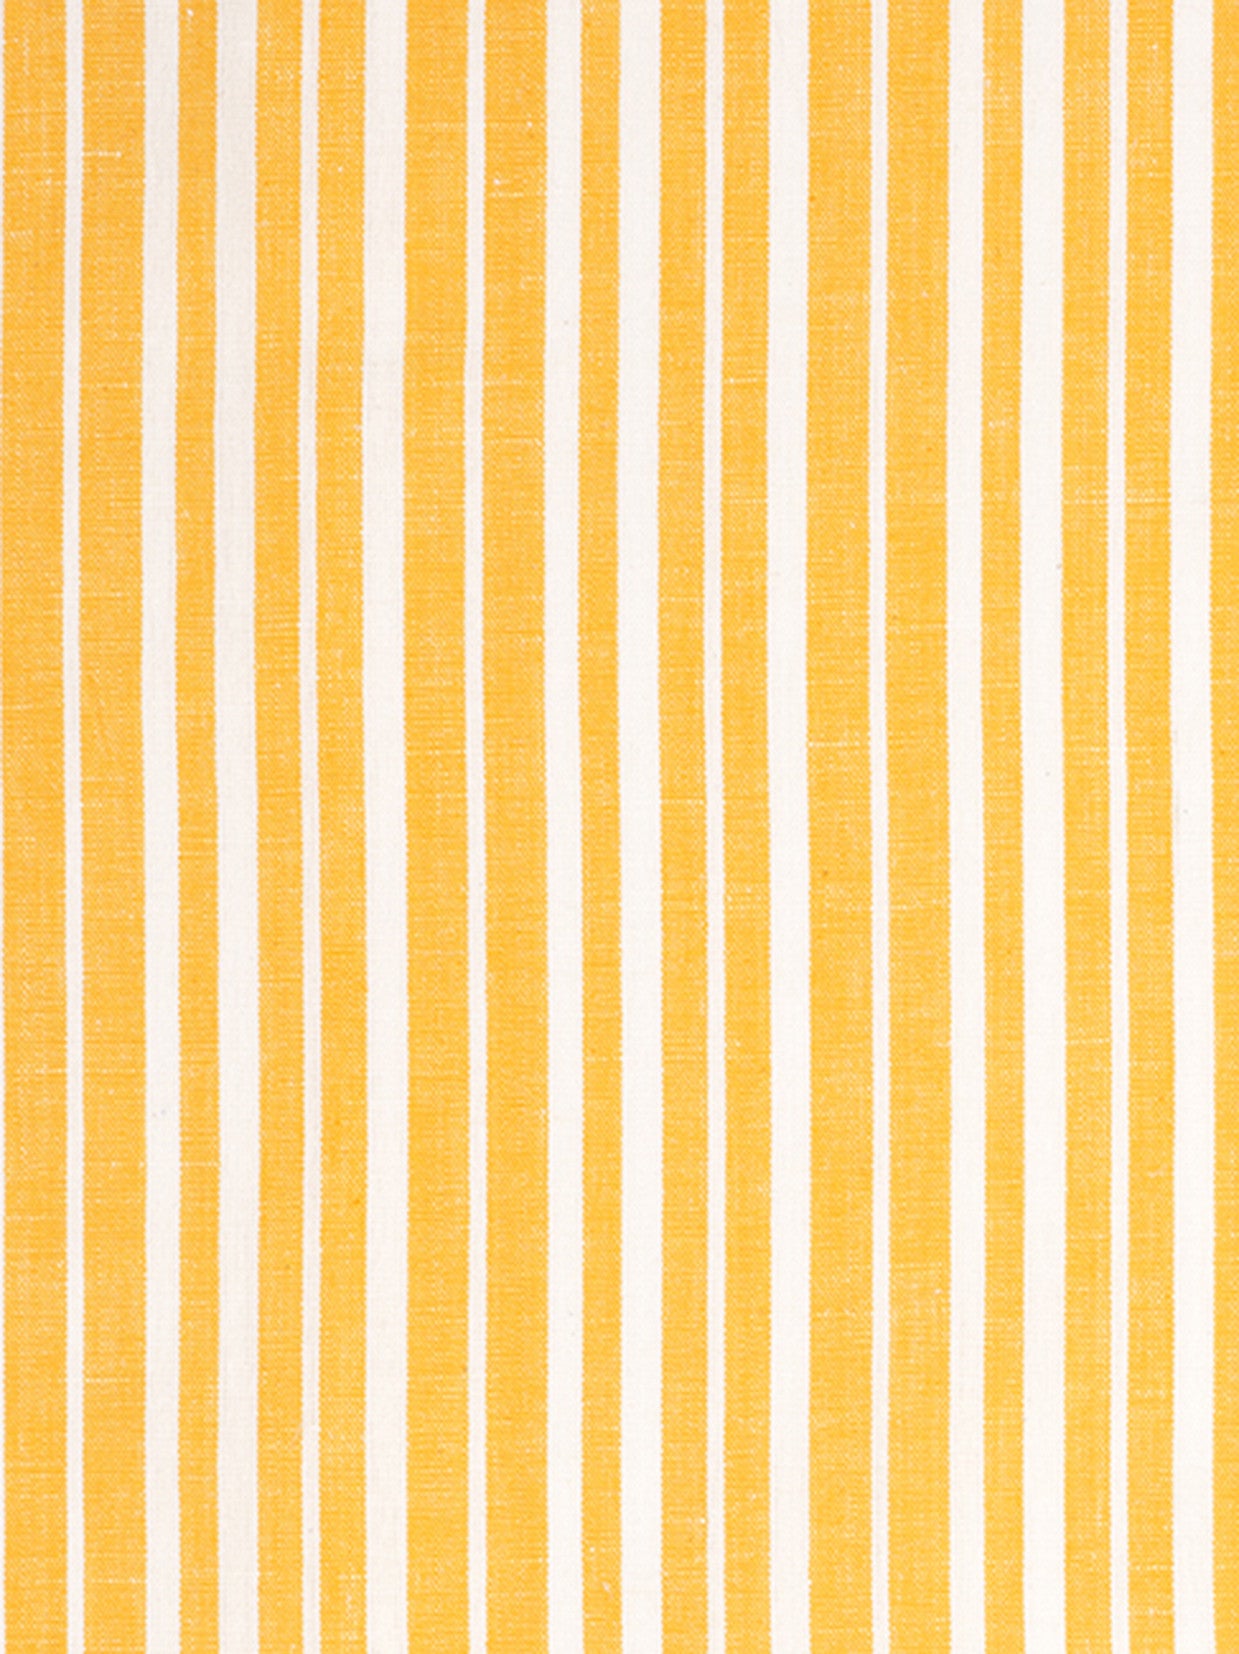 YELLOW White Striped Fabric - Sofia Stripes Curtain Upholstery